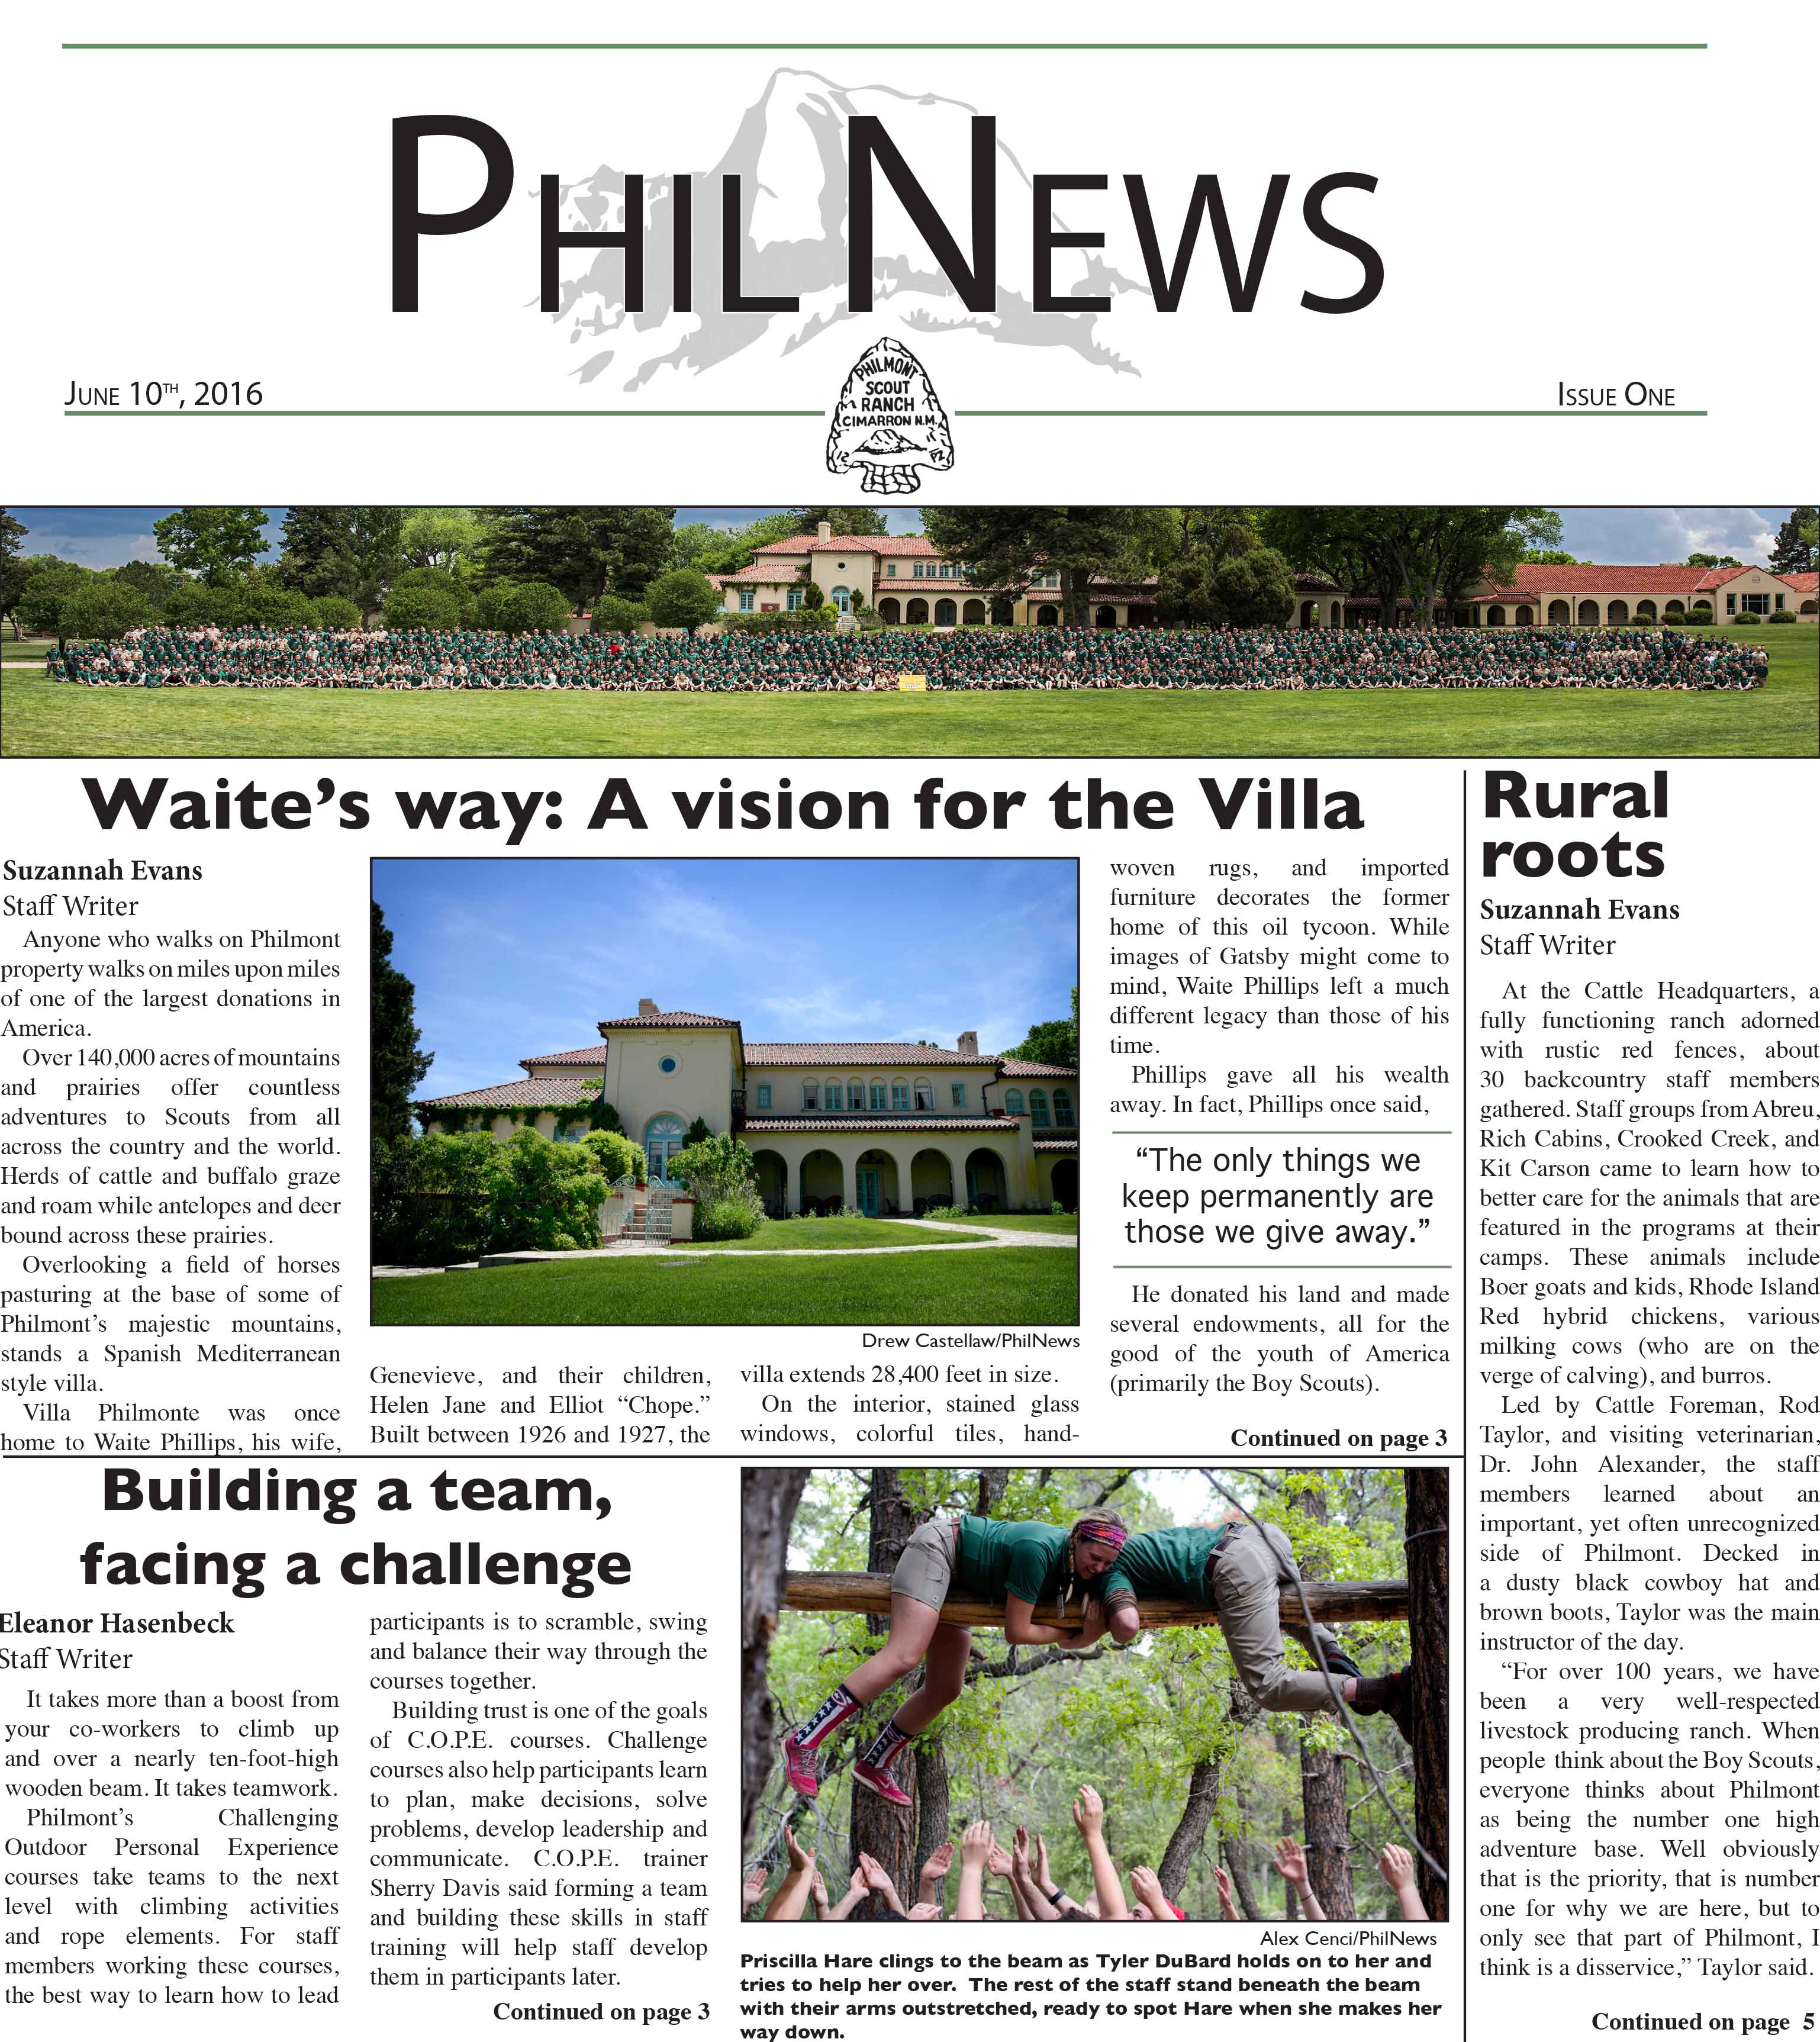 June 10, 2016 Issue 1